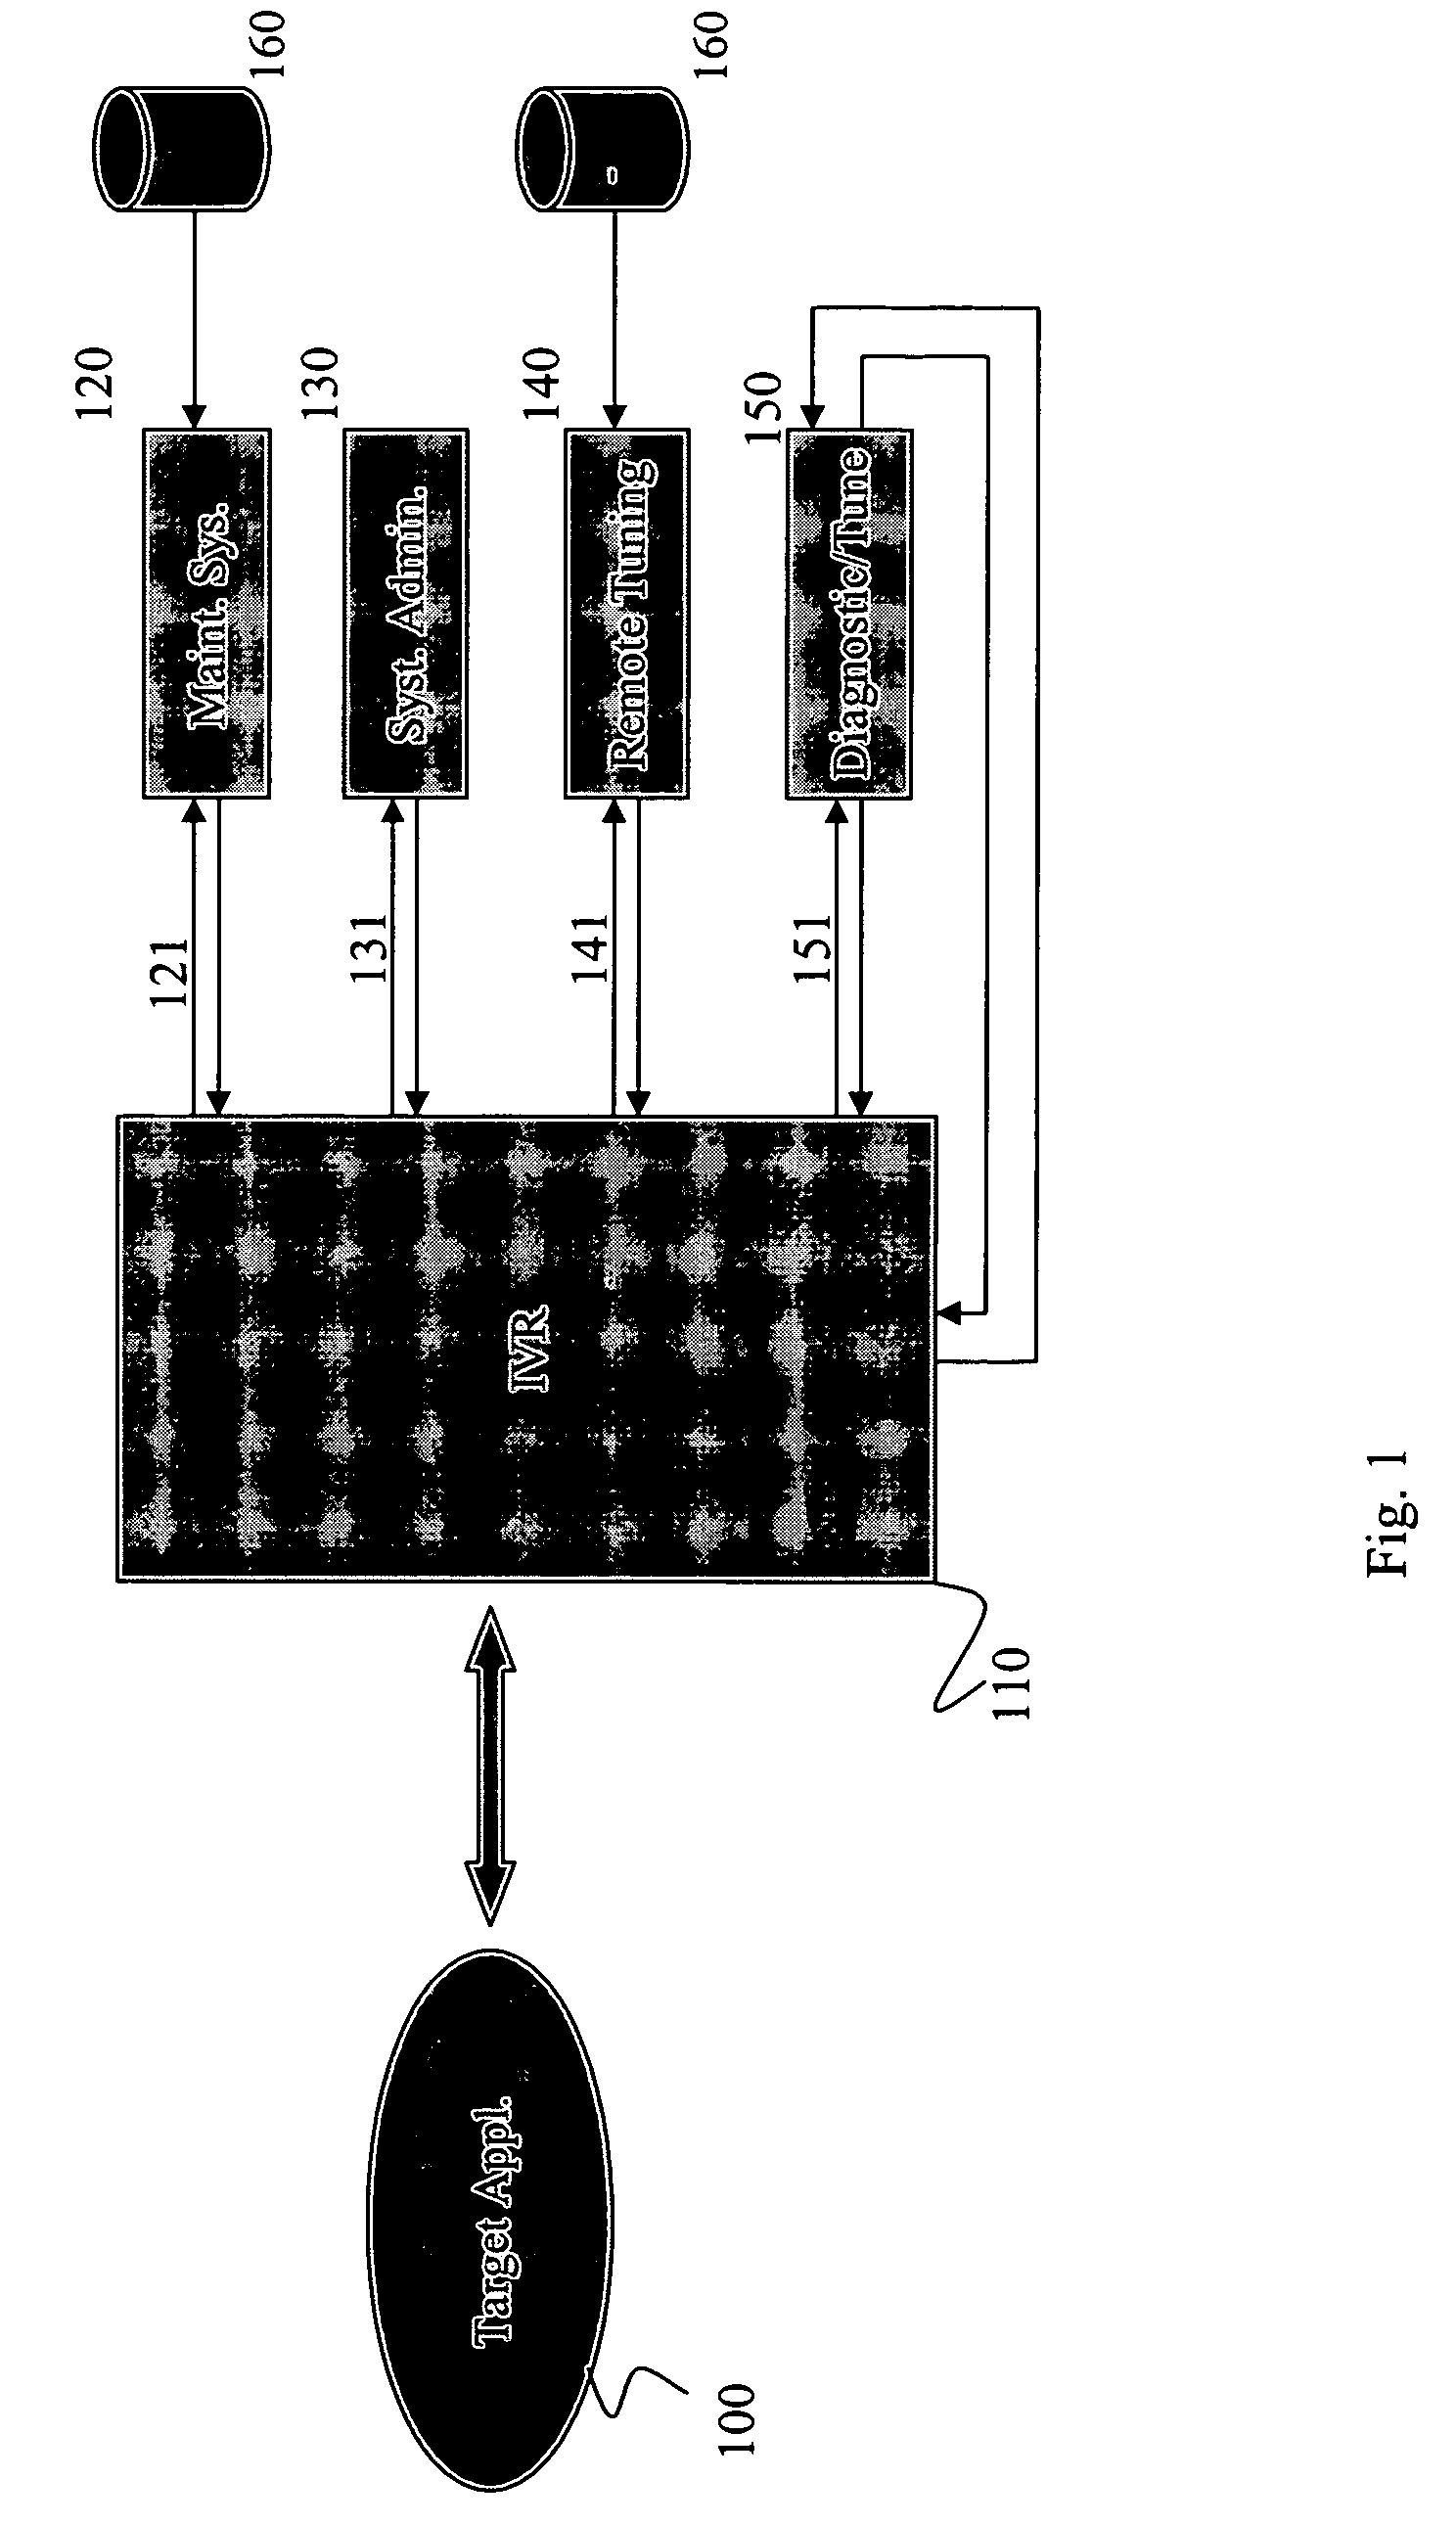 Method and apparatus for remote command, control and diagnostics of systems using conversational or audio interface